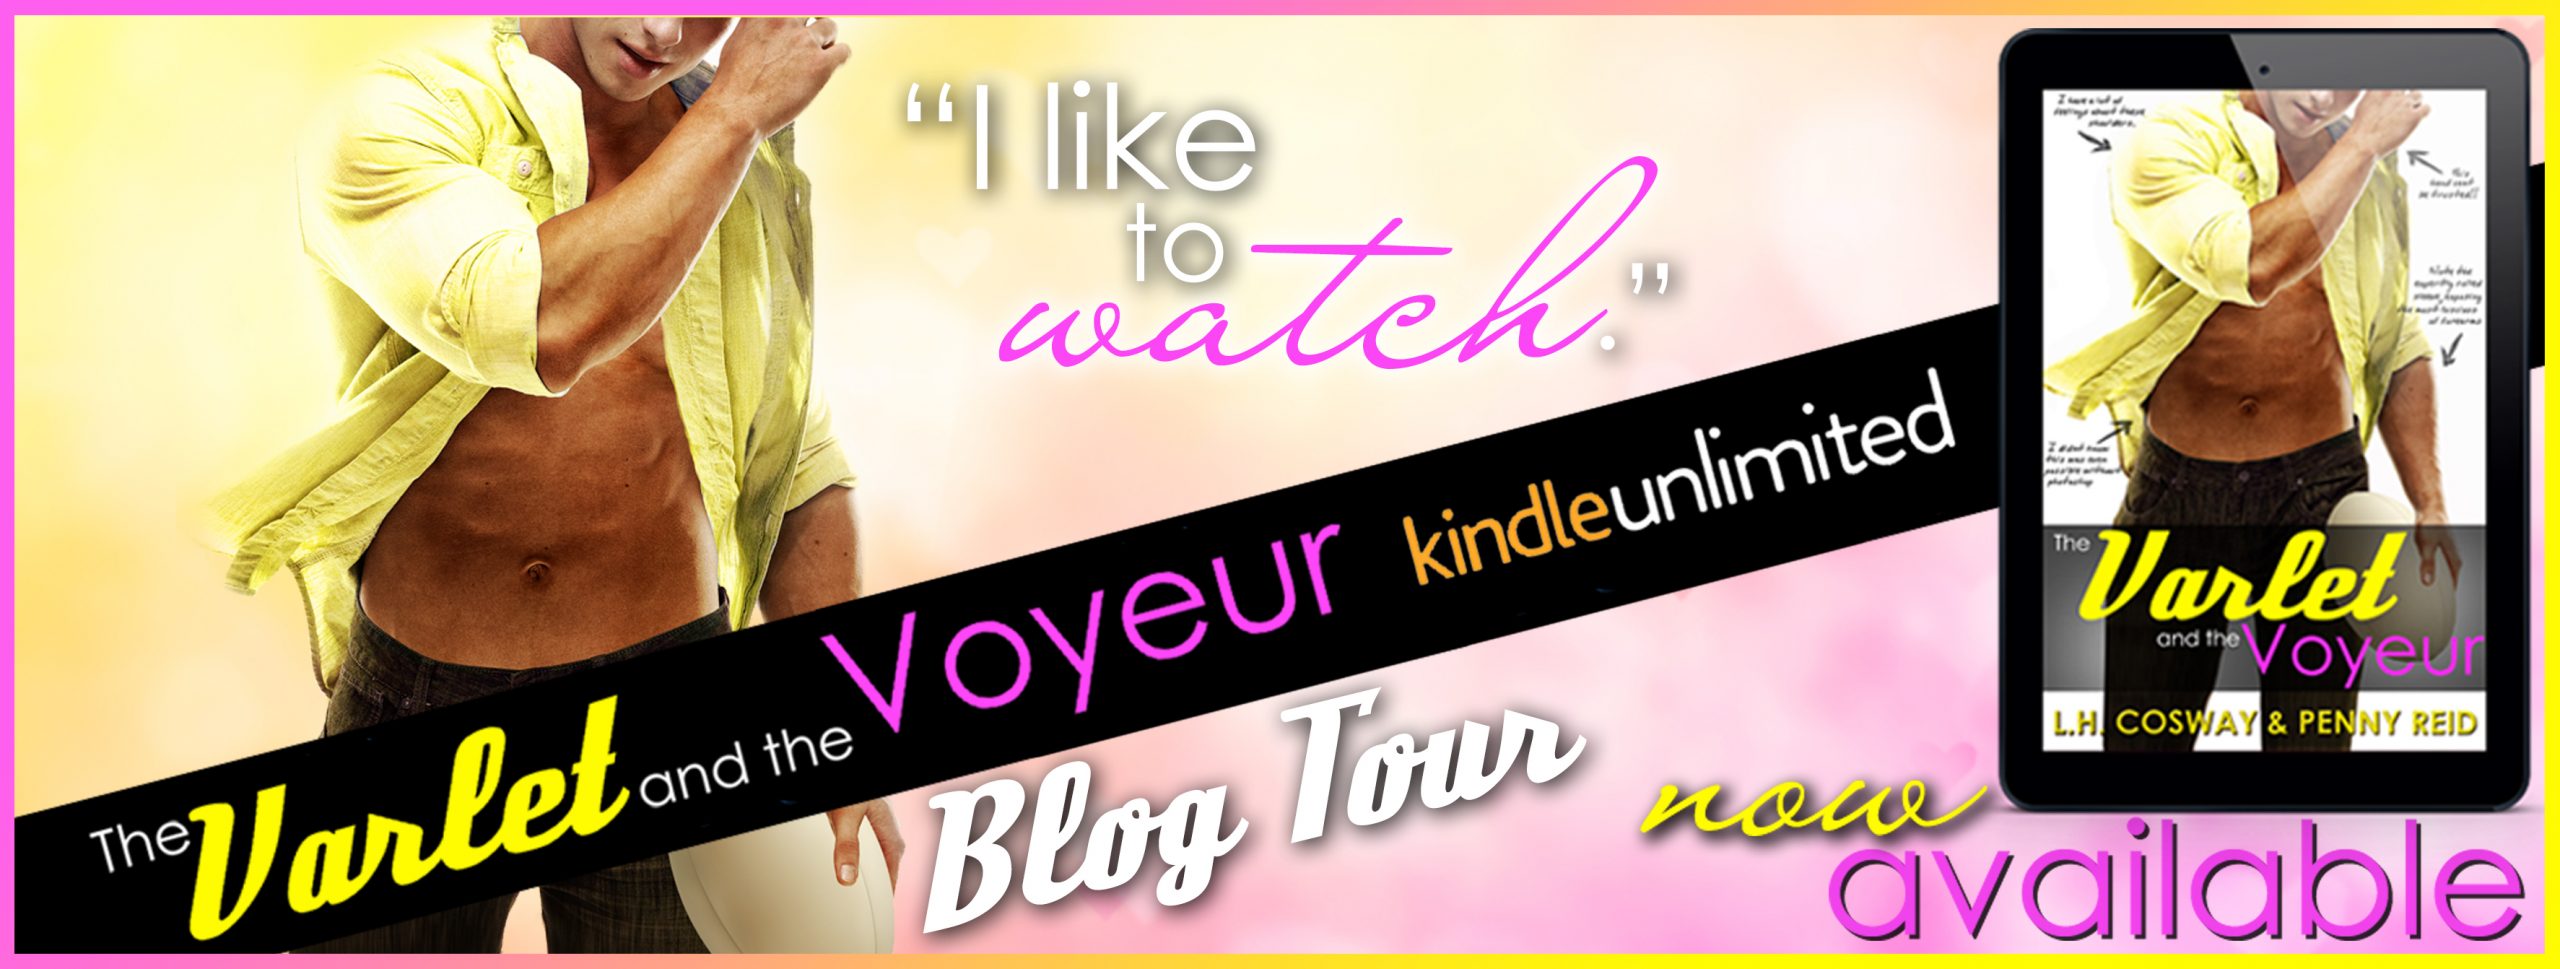 Blog Tour with Giveaway:  The Varlet and the Voyeur (Rugby #4) by L.H. Cosway and Penny Reid